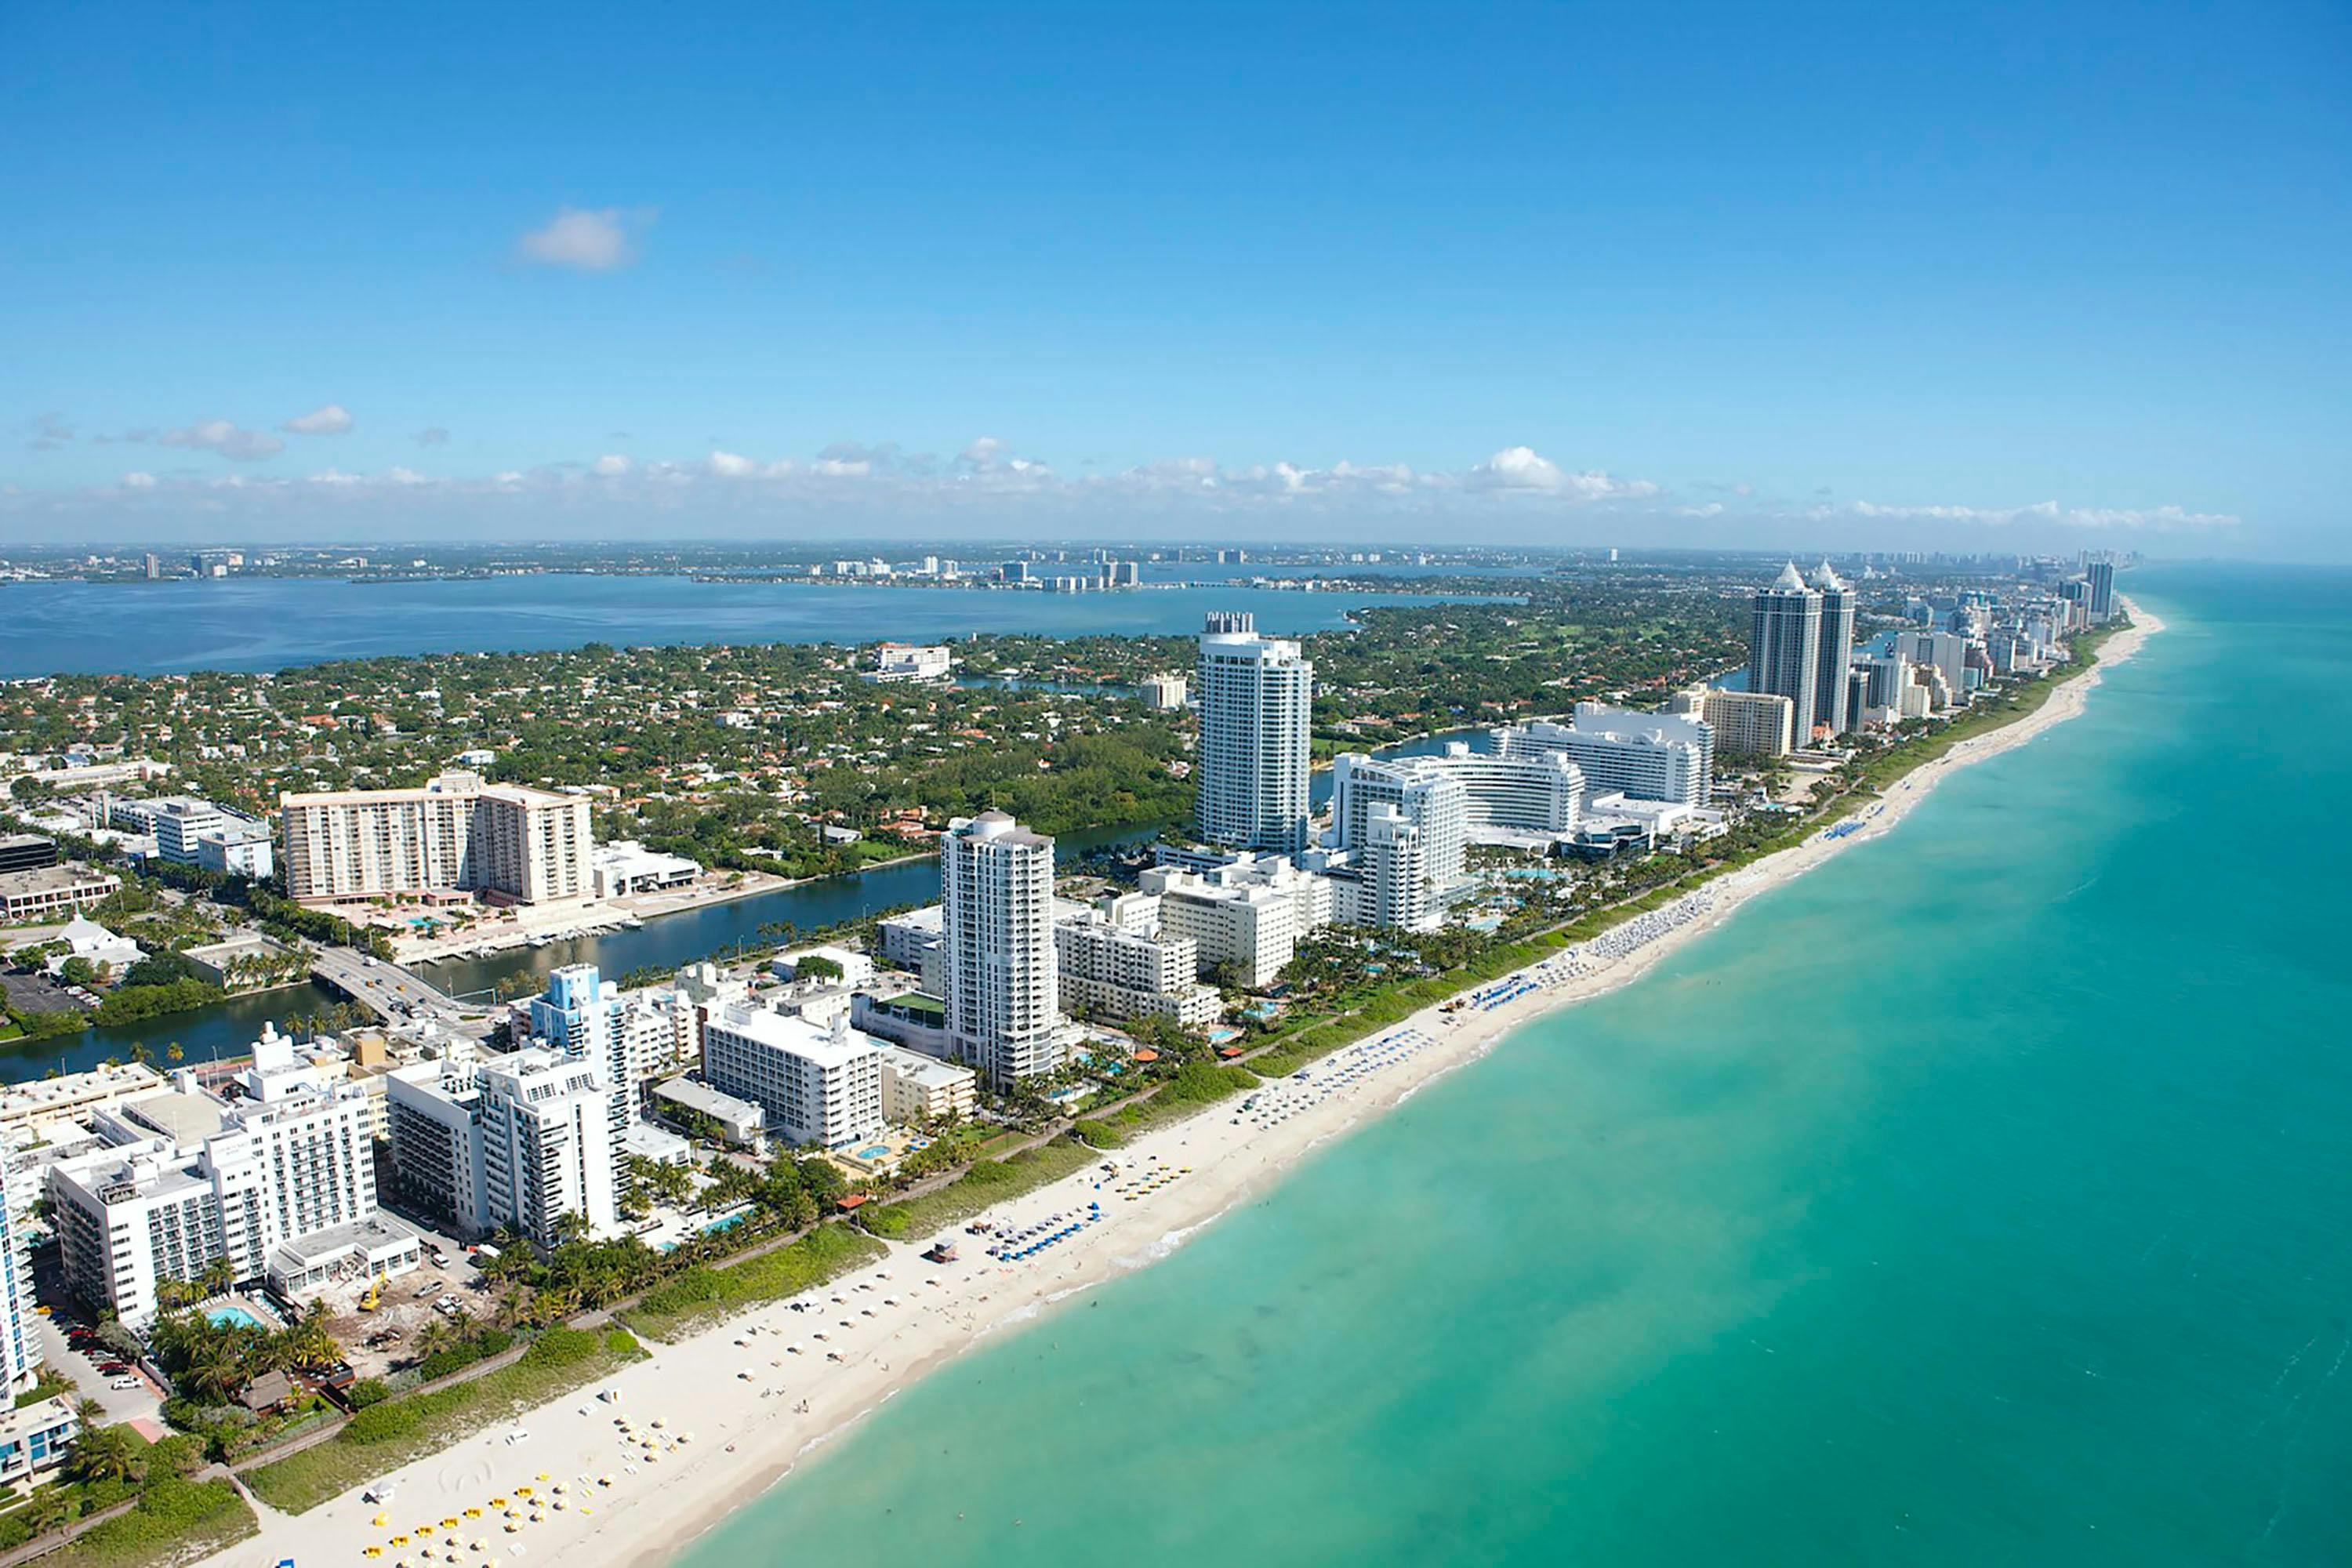 Exciting weekend trips from Miami